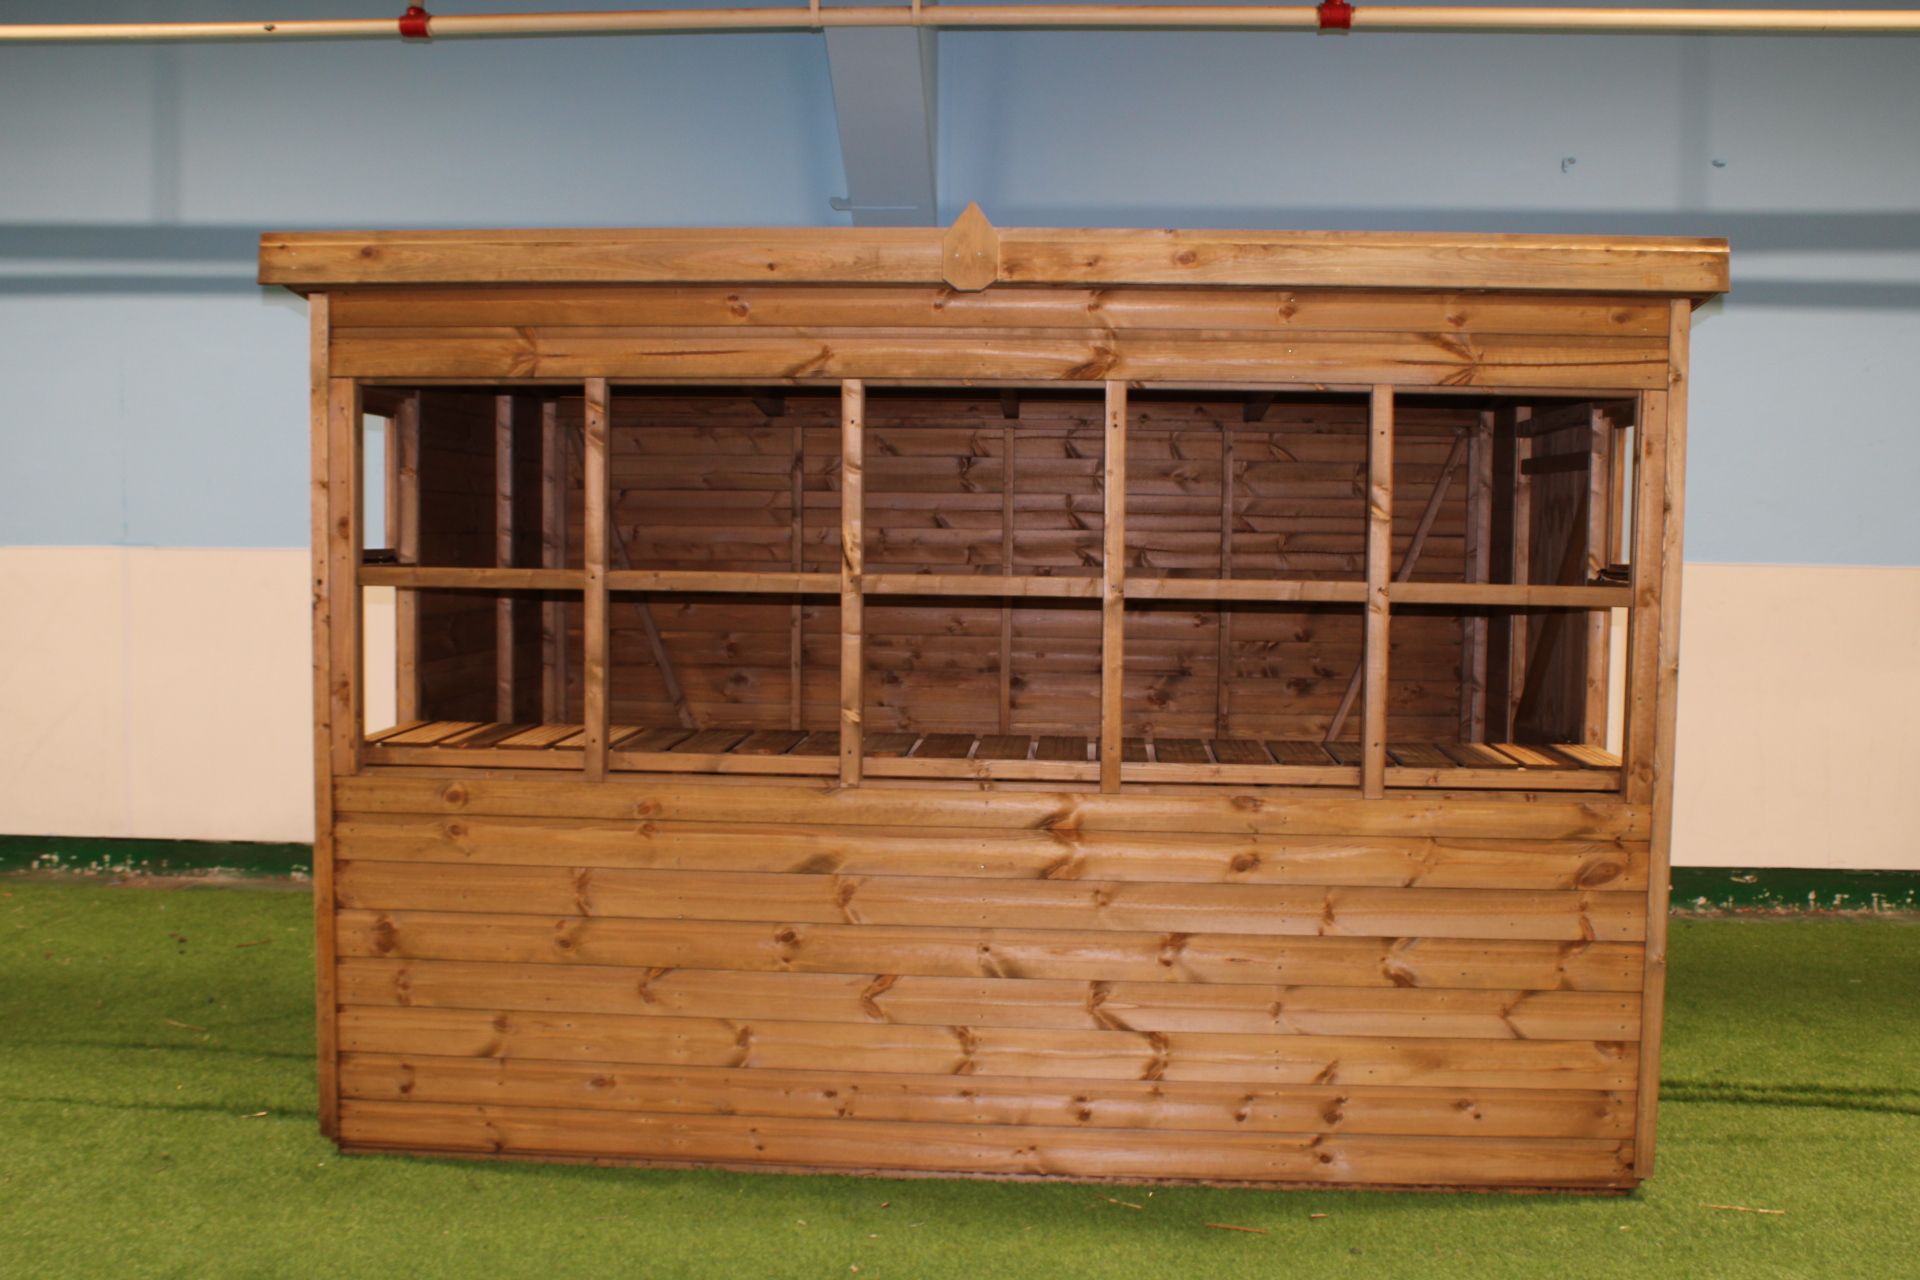 10X6 BRAND NEW Potting shed, Standard 16mm Nominal Cladding (SUNPENT) RRP£1400 - Image 5 of 8